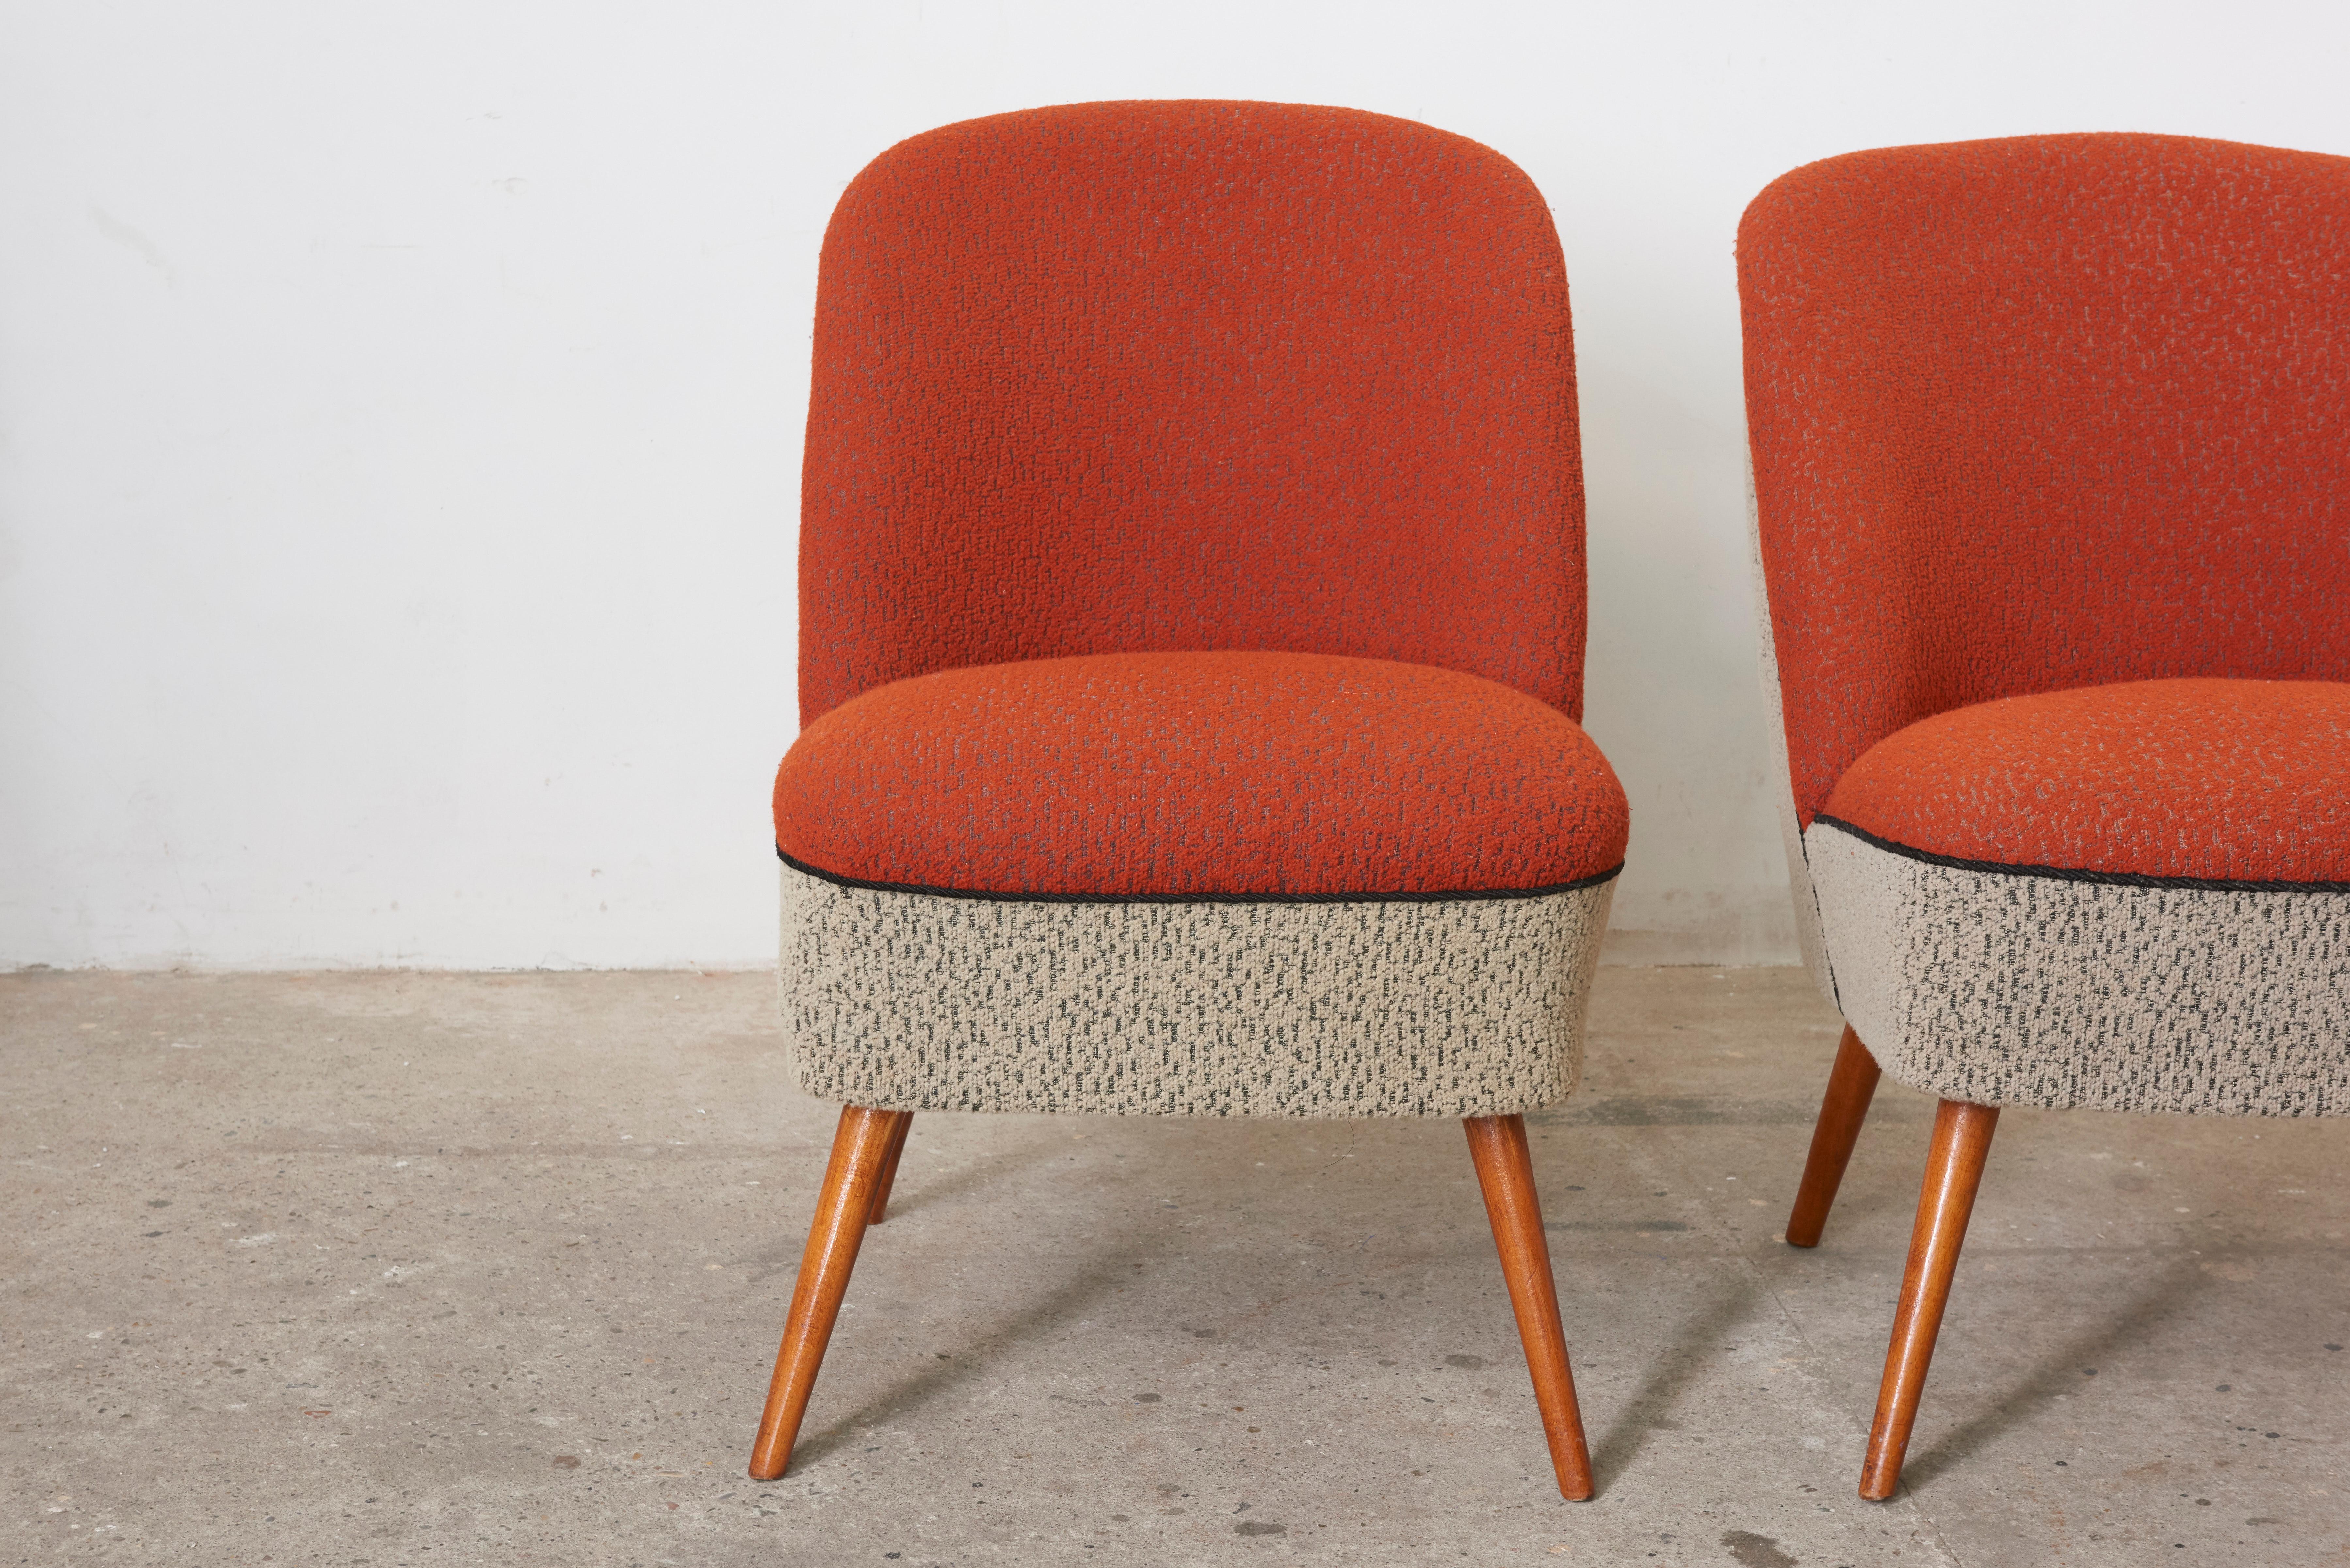 These Cocktail Chairs were originally produced in Switzerland in the 1950s and have typical tapered legs and a plain curved back that hugs you as you recline.
These chairs are charming in the original 1950s upholstered colored wool in red,white and